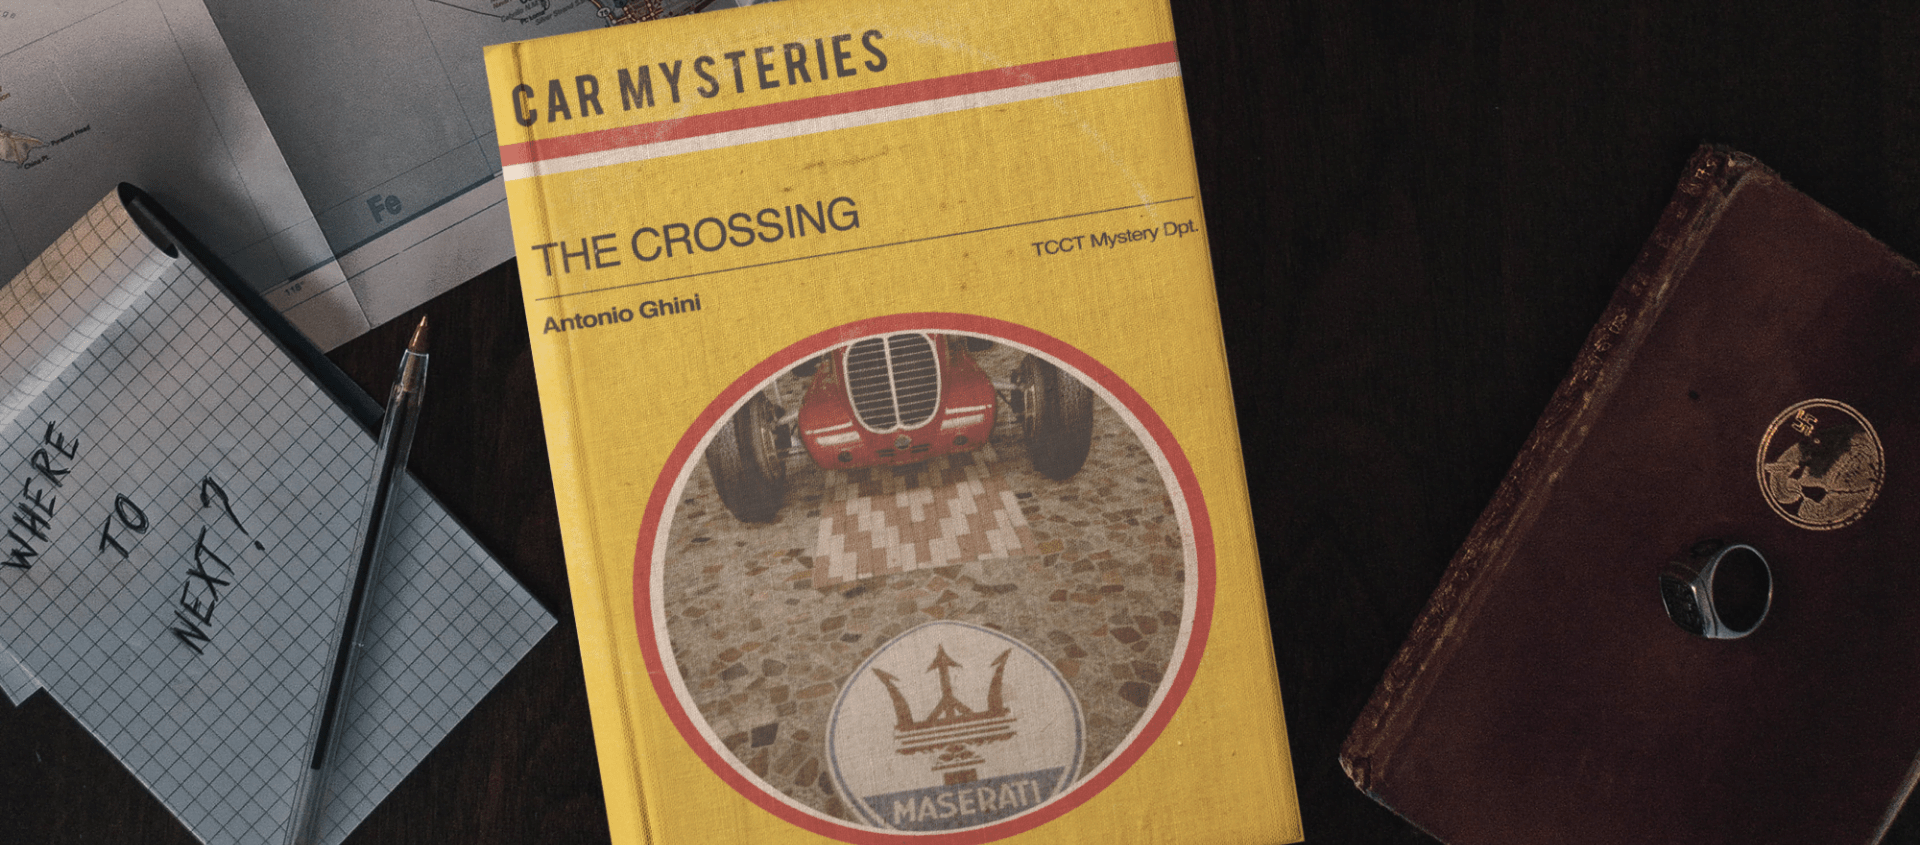 The crossing image